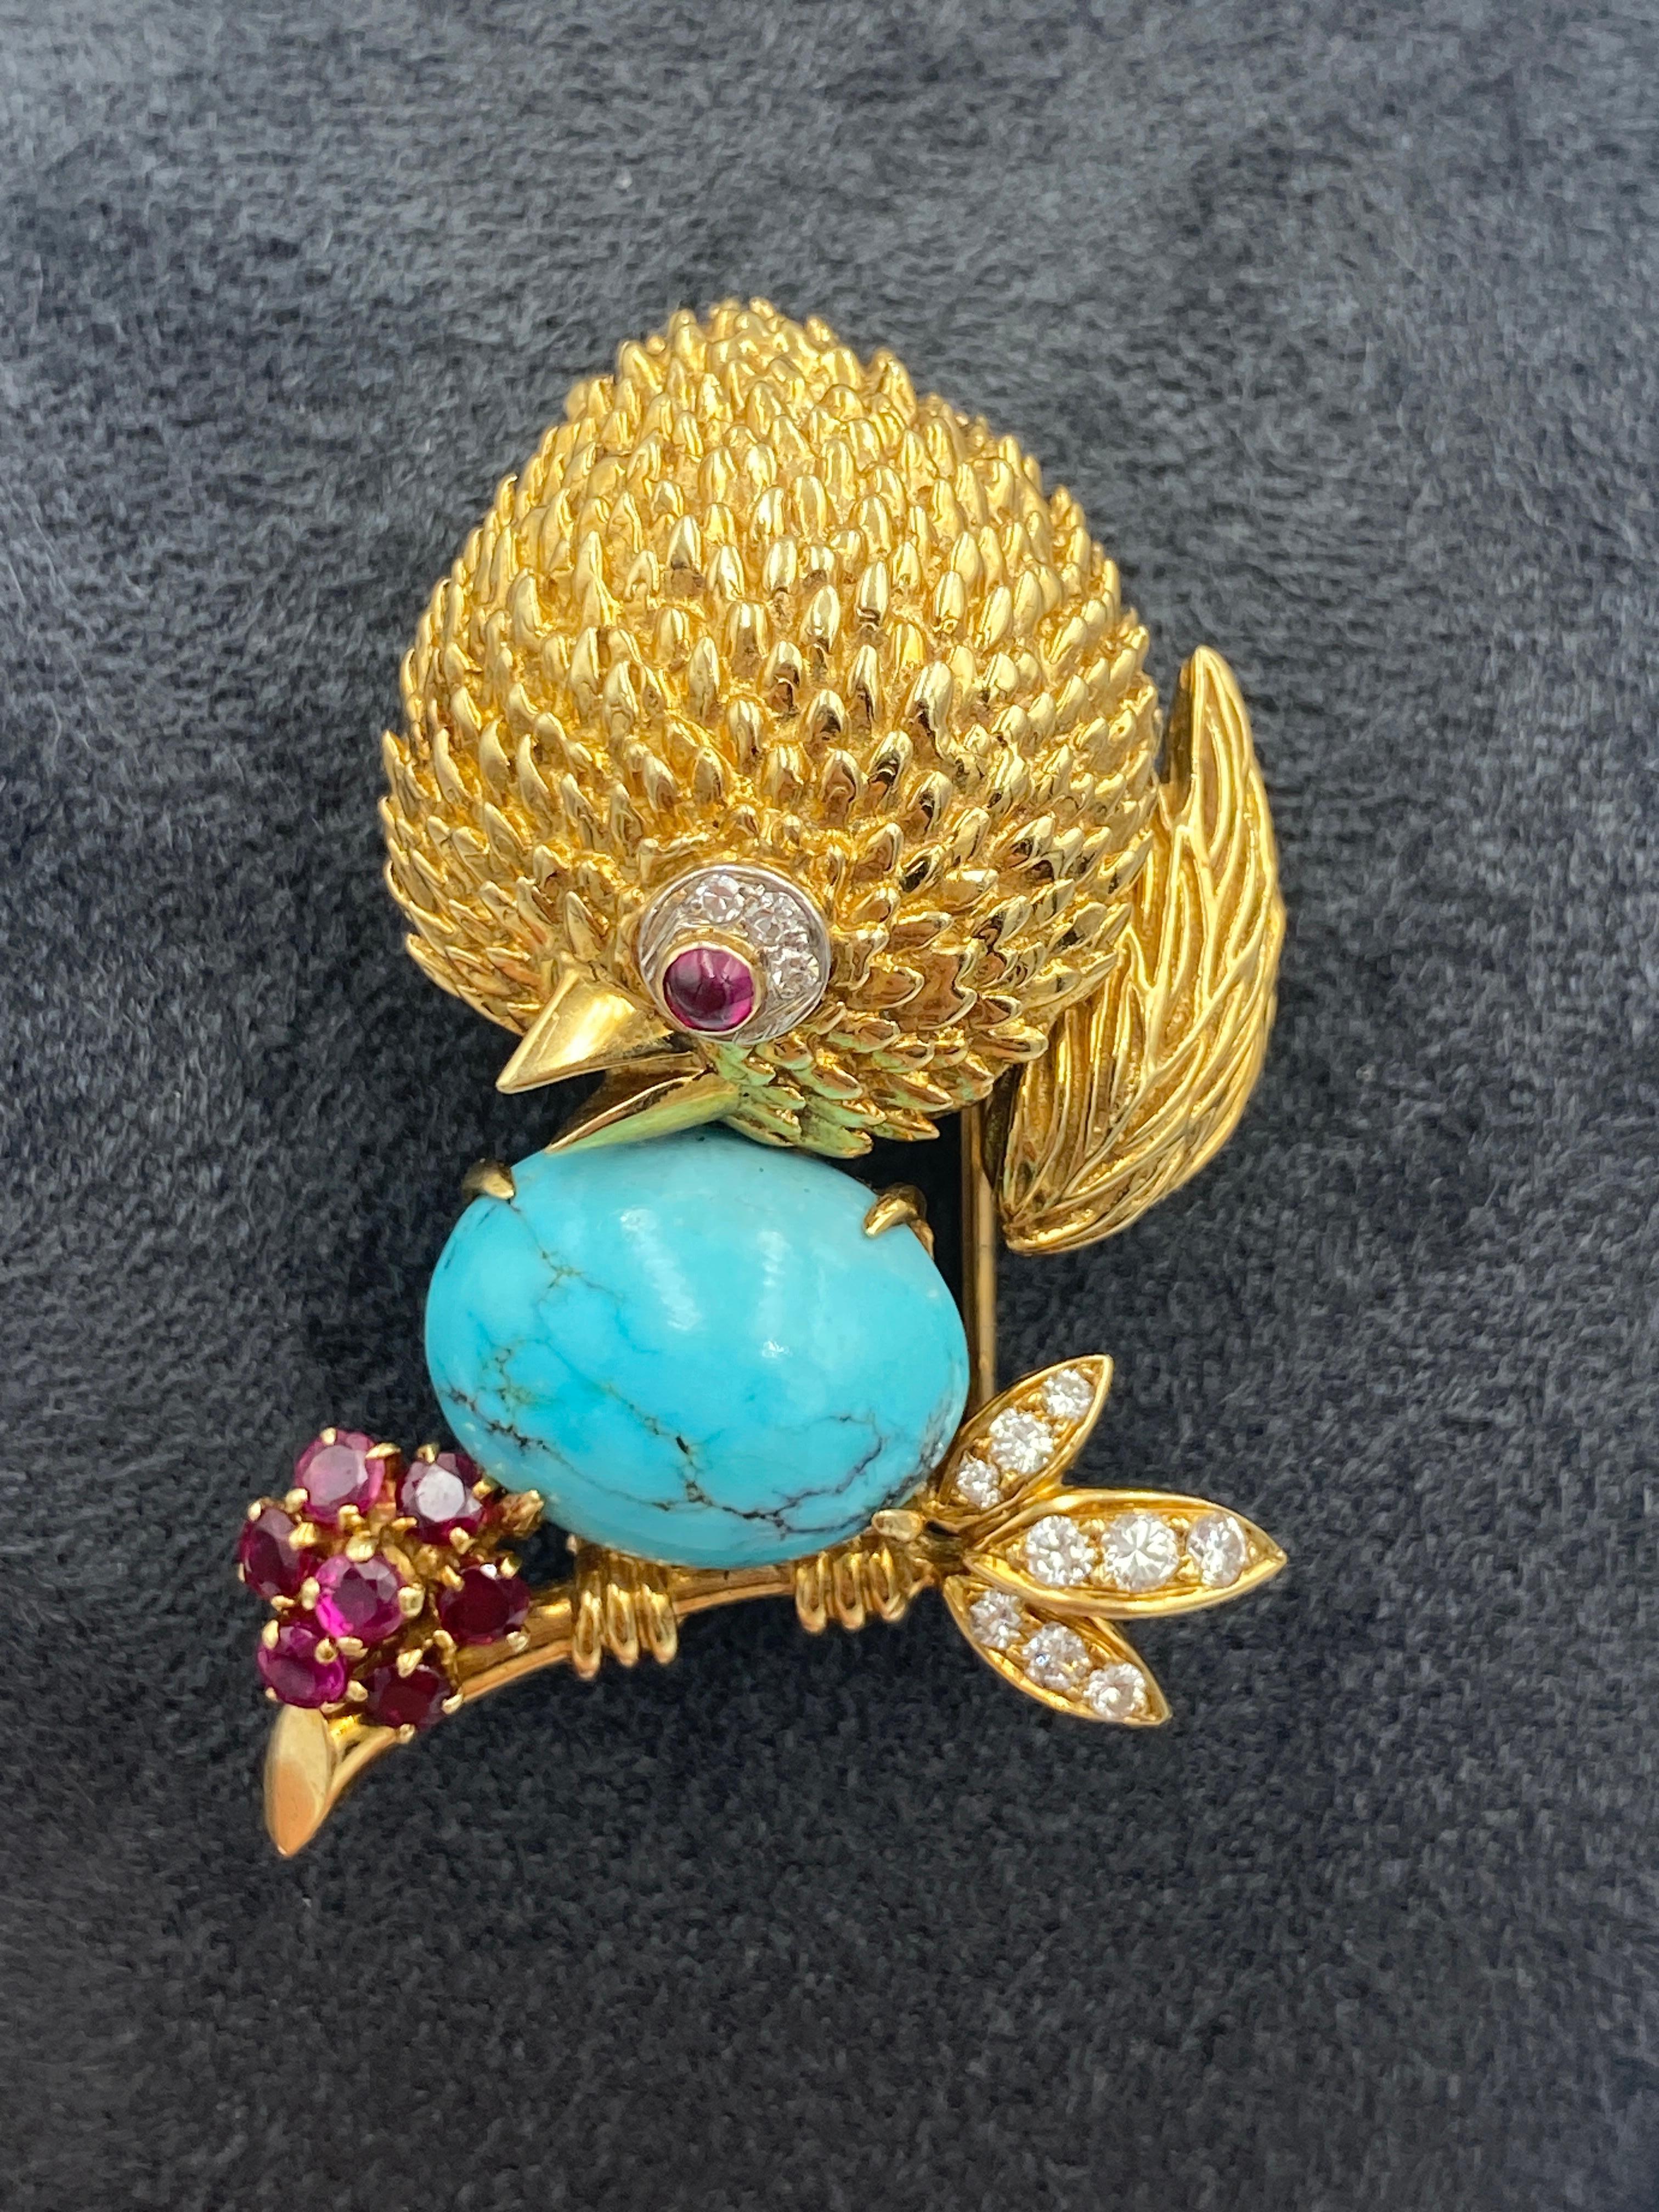 This delightful 1960s VCA chick brooch is made of 18k gold and is adorned with small round cut diamonds and rubies with a large cabochon turquoise as its egg. It would make a fine addition to any collection.